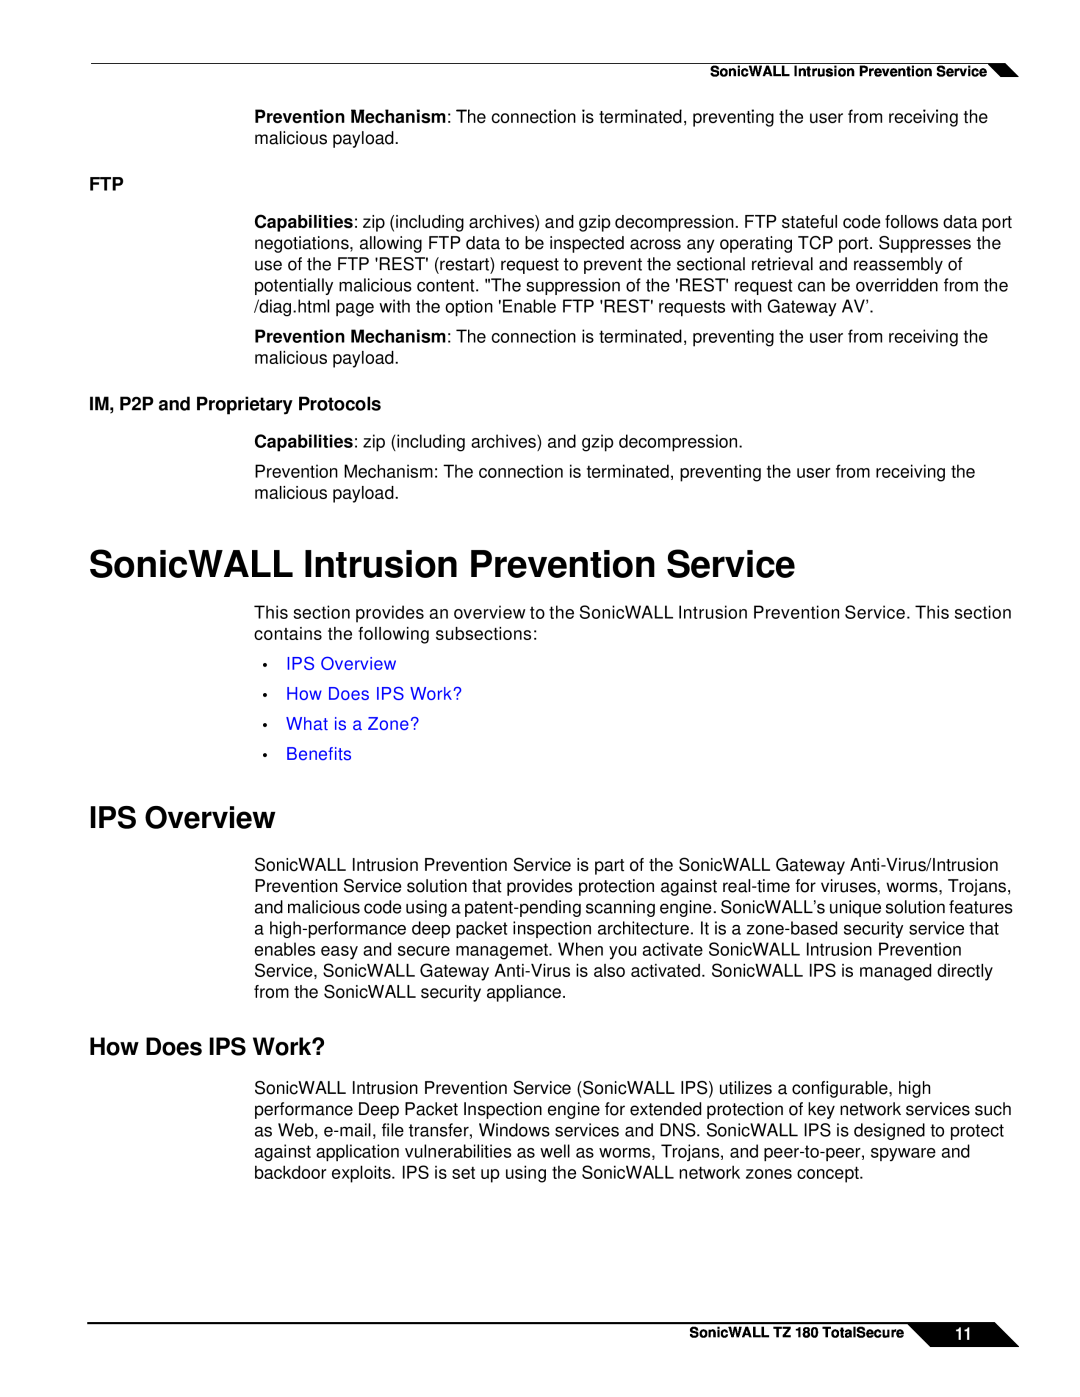 SonicWALL TZ 180 manual SonicWALL Intrusion Prevention Service, IPS Overview, How Does IPS Work? 